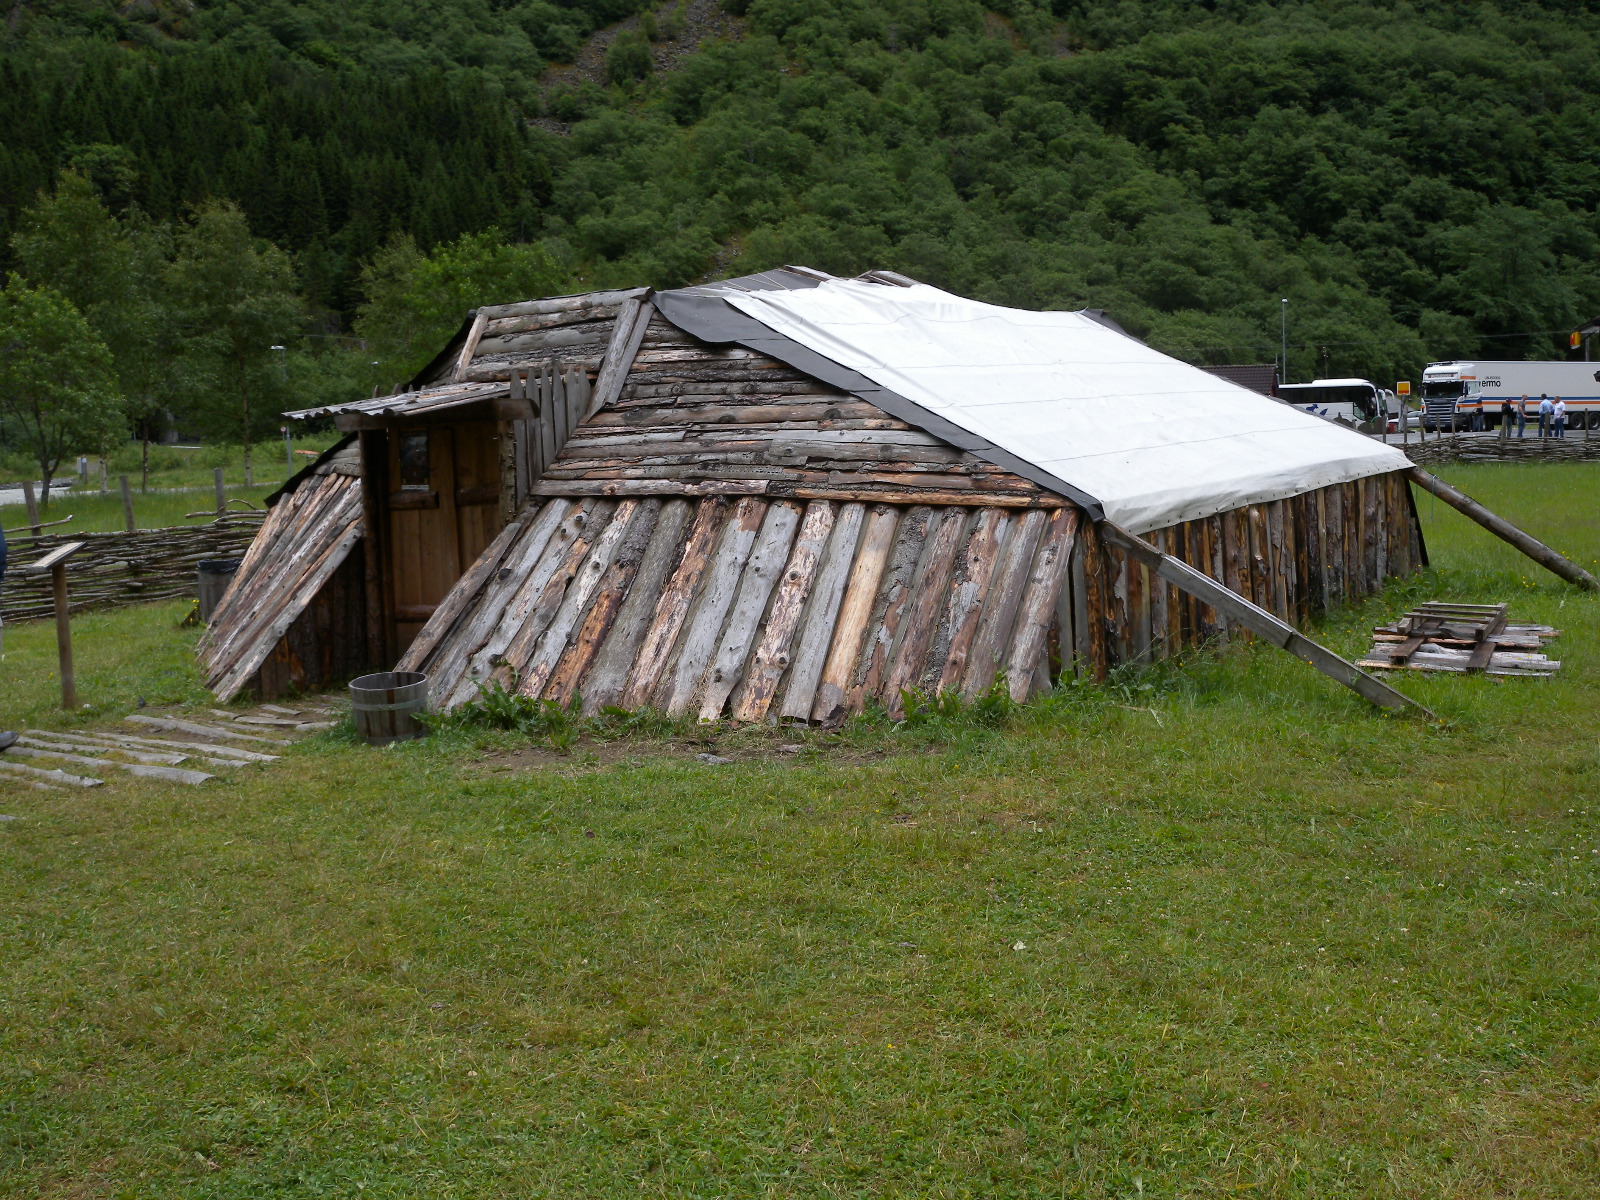 a small wooden structure sitting in the middle of a field